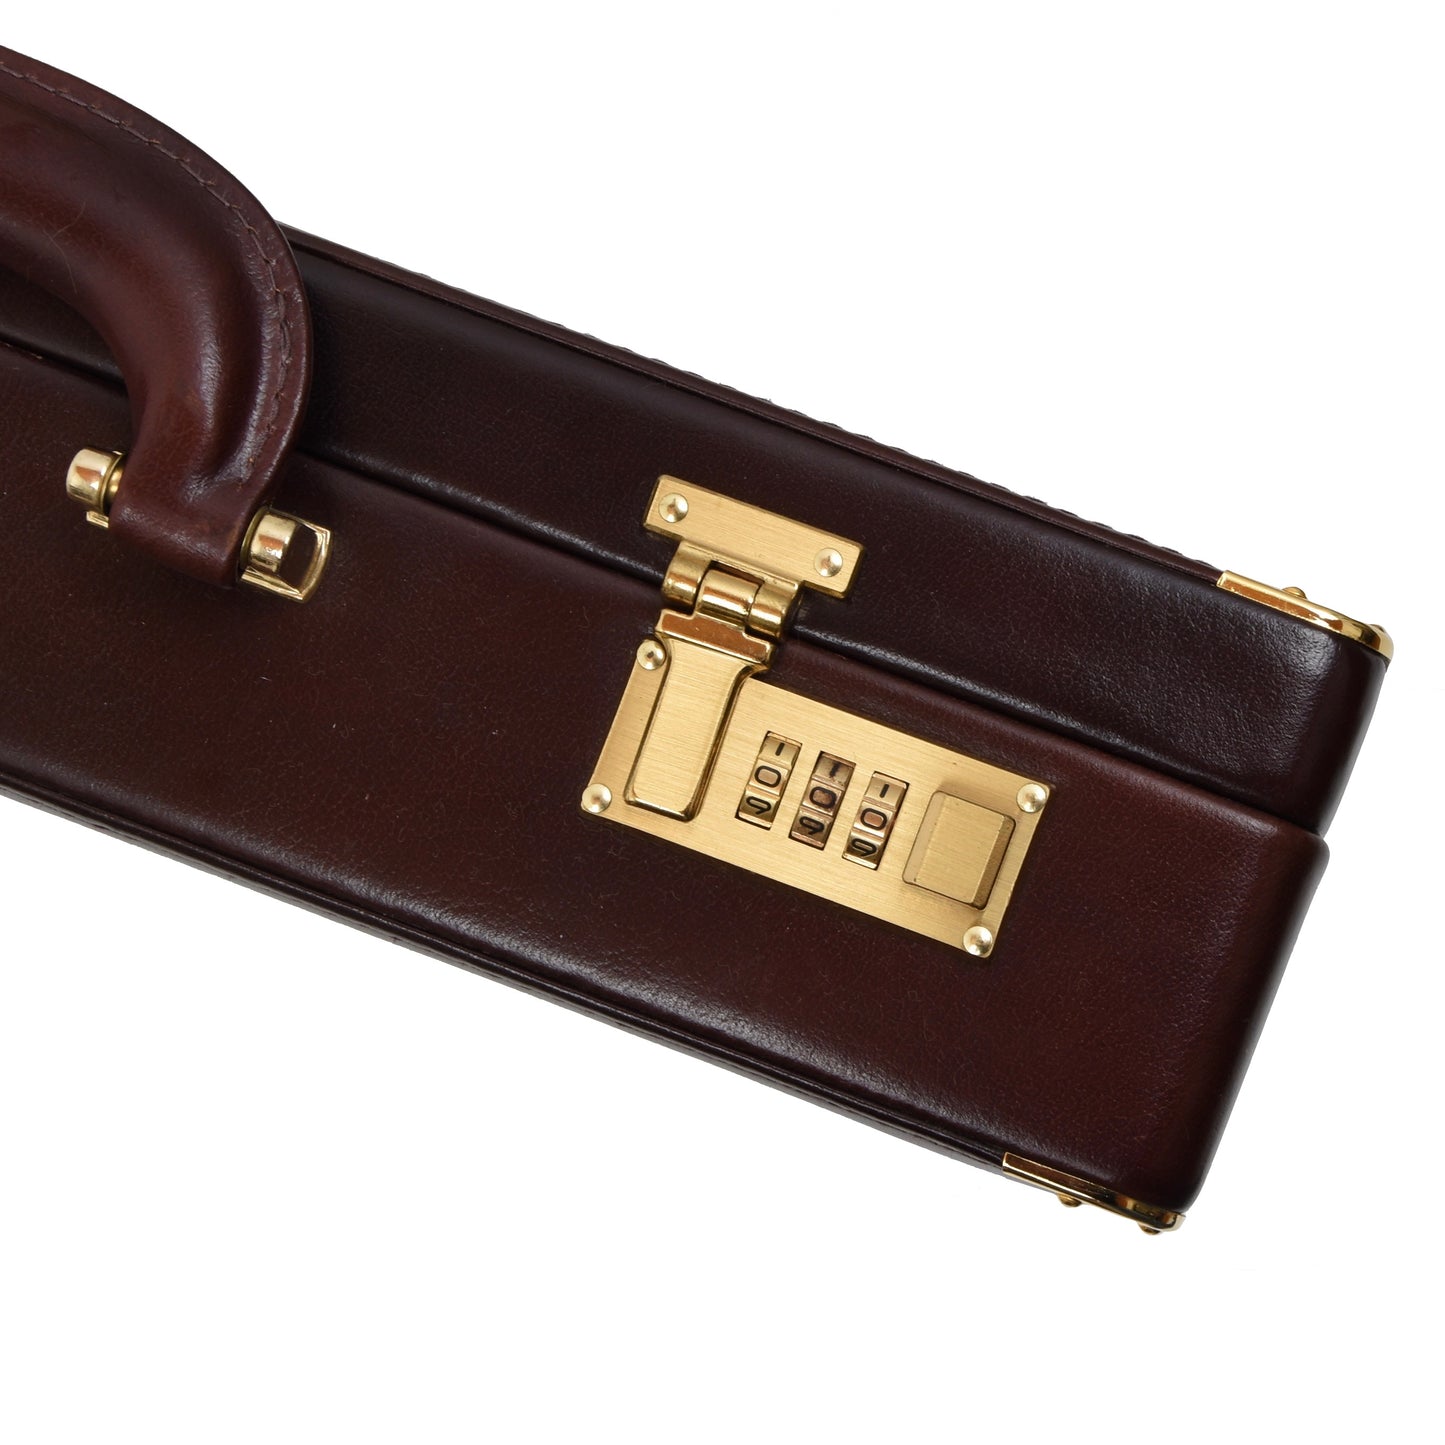 Executive Leather Briefcase - Brown